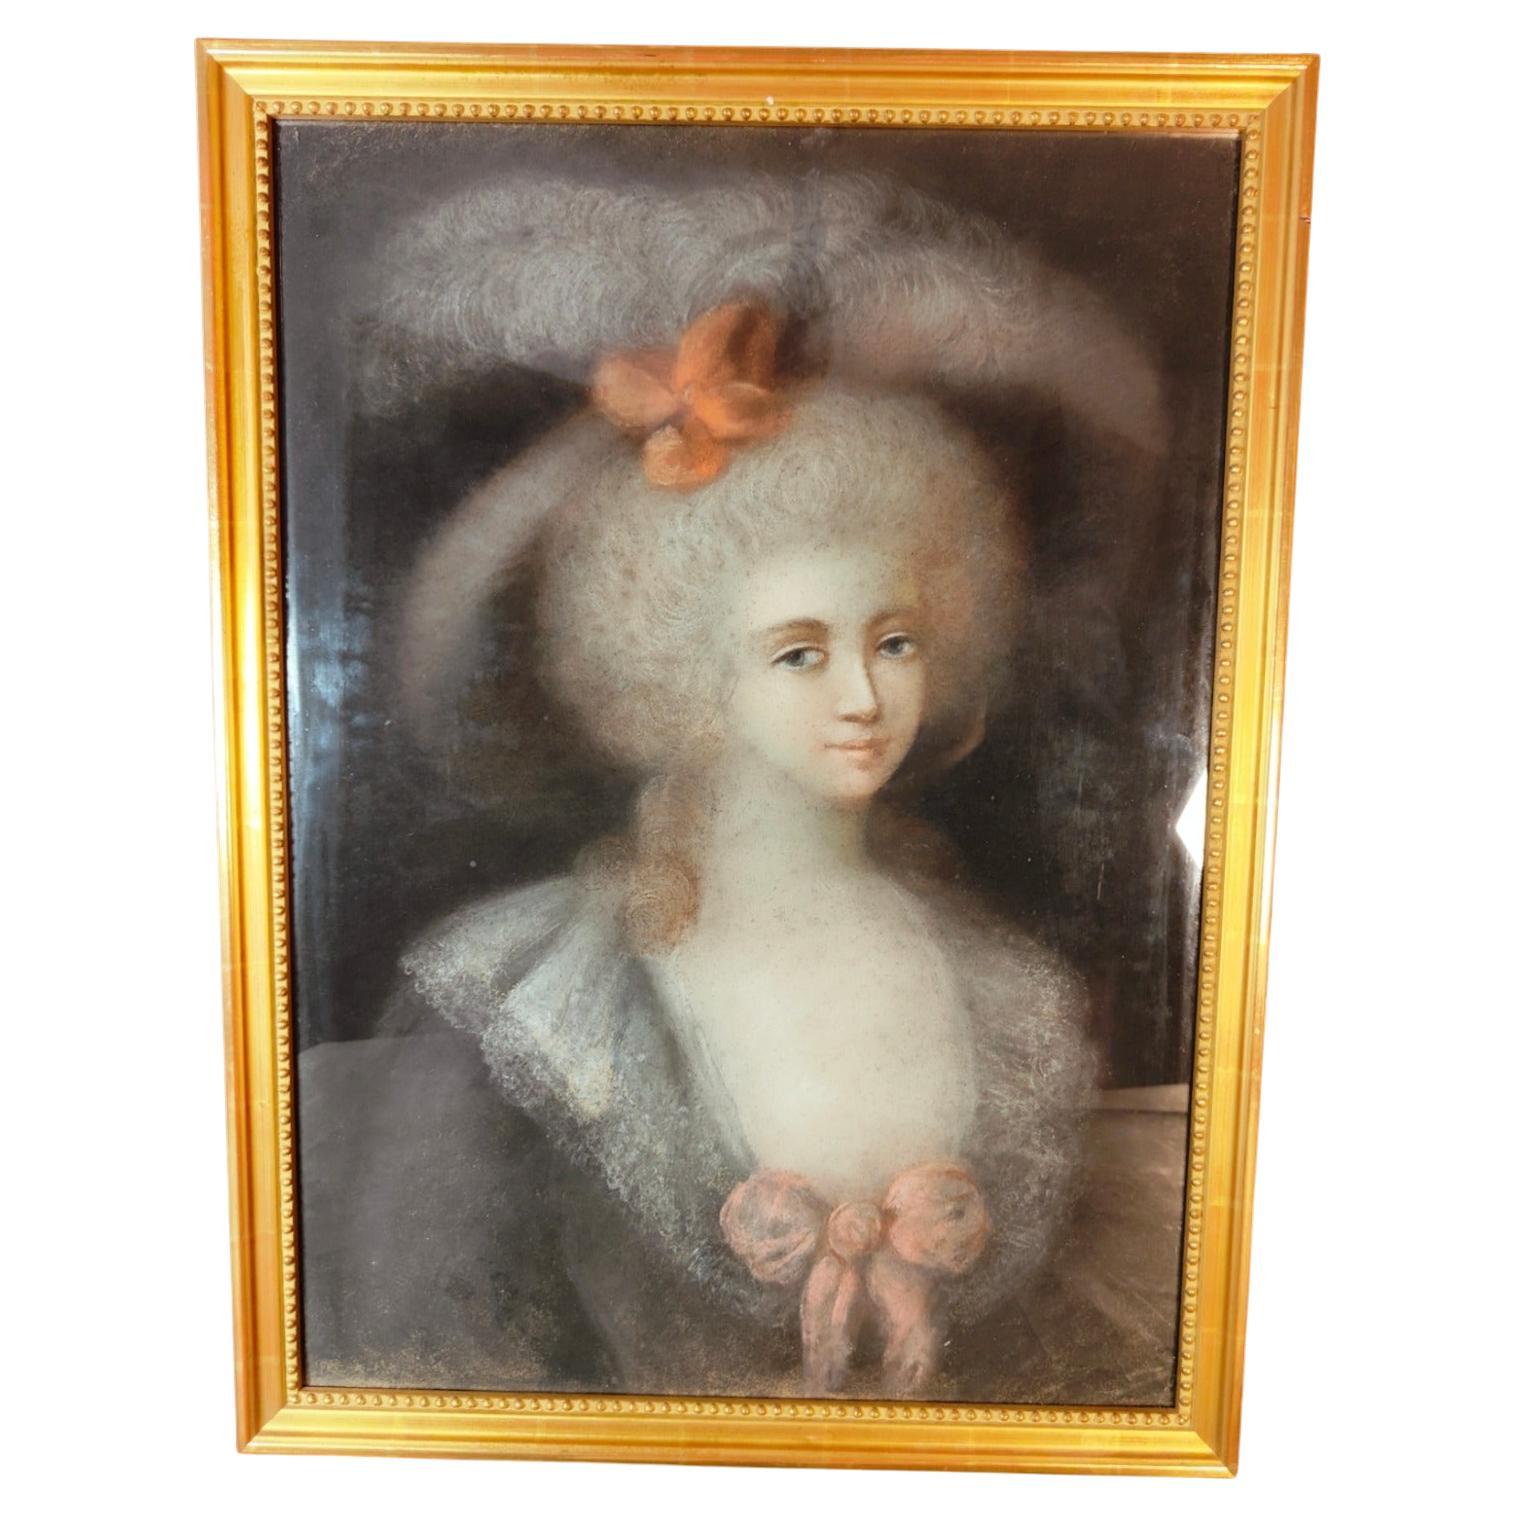  18th Century French Drawing
 18TH CENTURY FRENCH DRAWING PORTRAIT OF A LADY FROM THE 18TH CENTURY DONE IN PASTEL THE FRAME IS BACK IN GOLDEN WOOD MEASUREMENTS: 70X52 CM